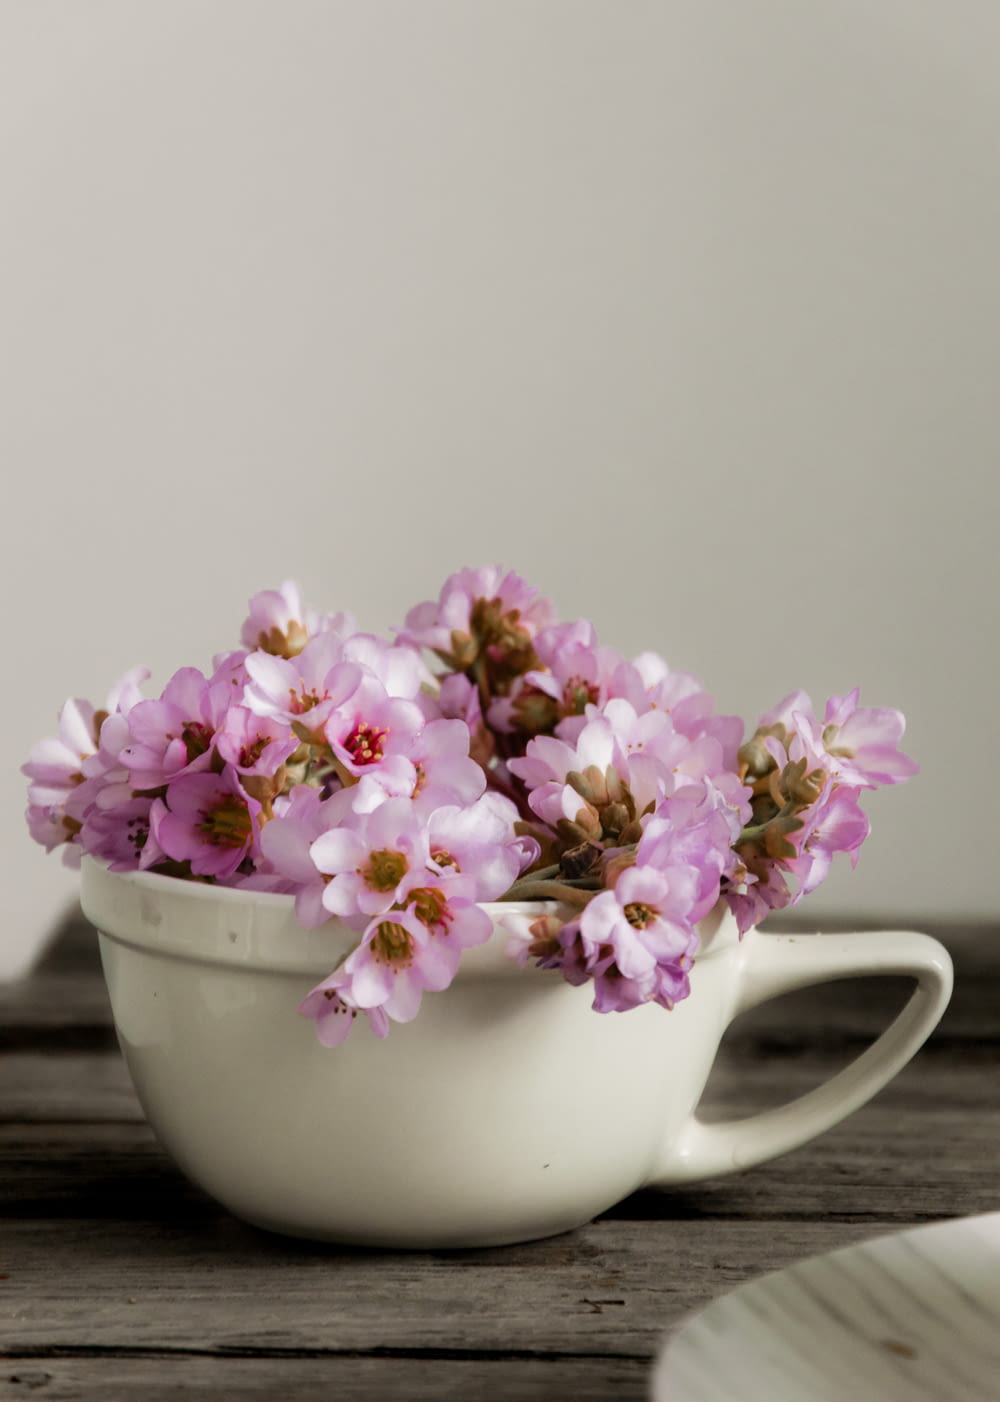 a white cup filled with pink flowers on top of a wooden table